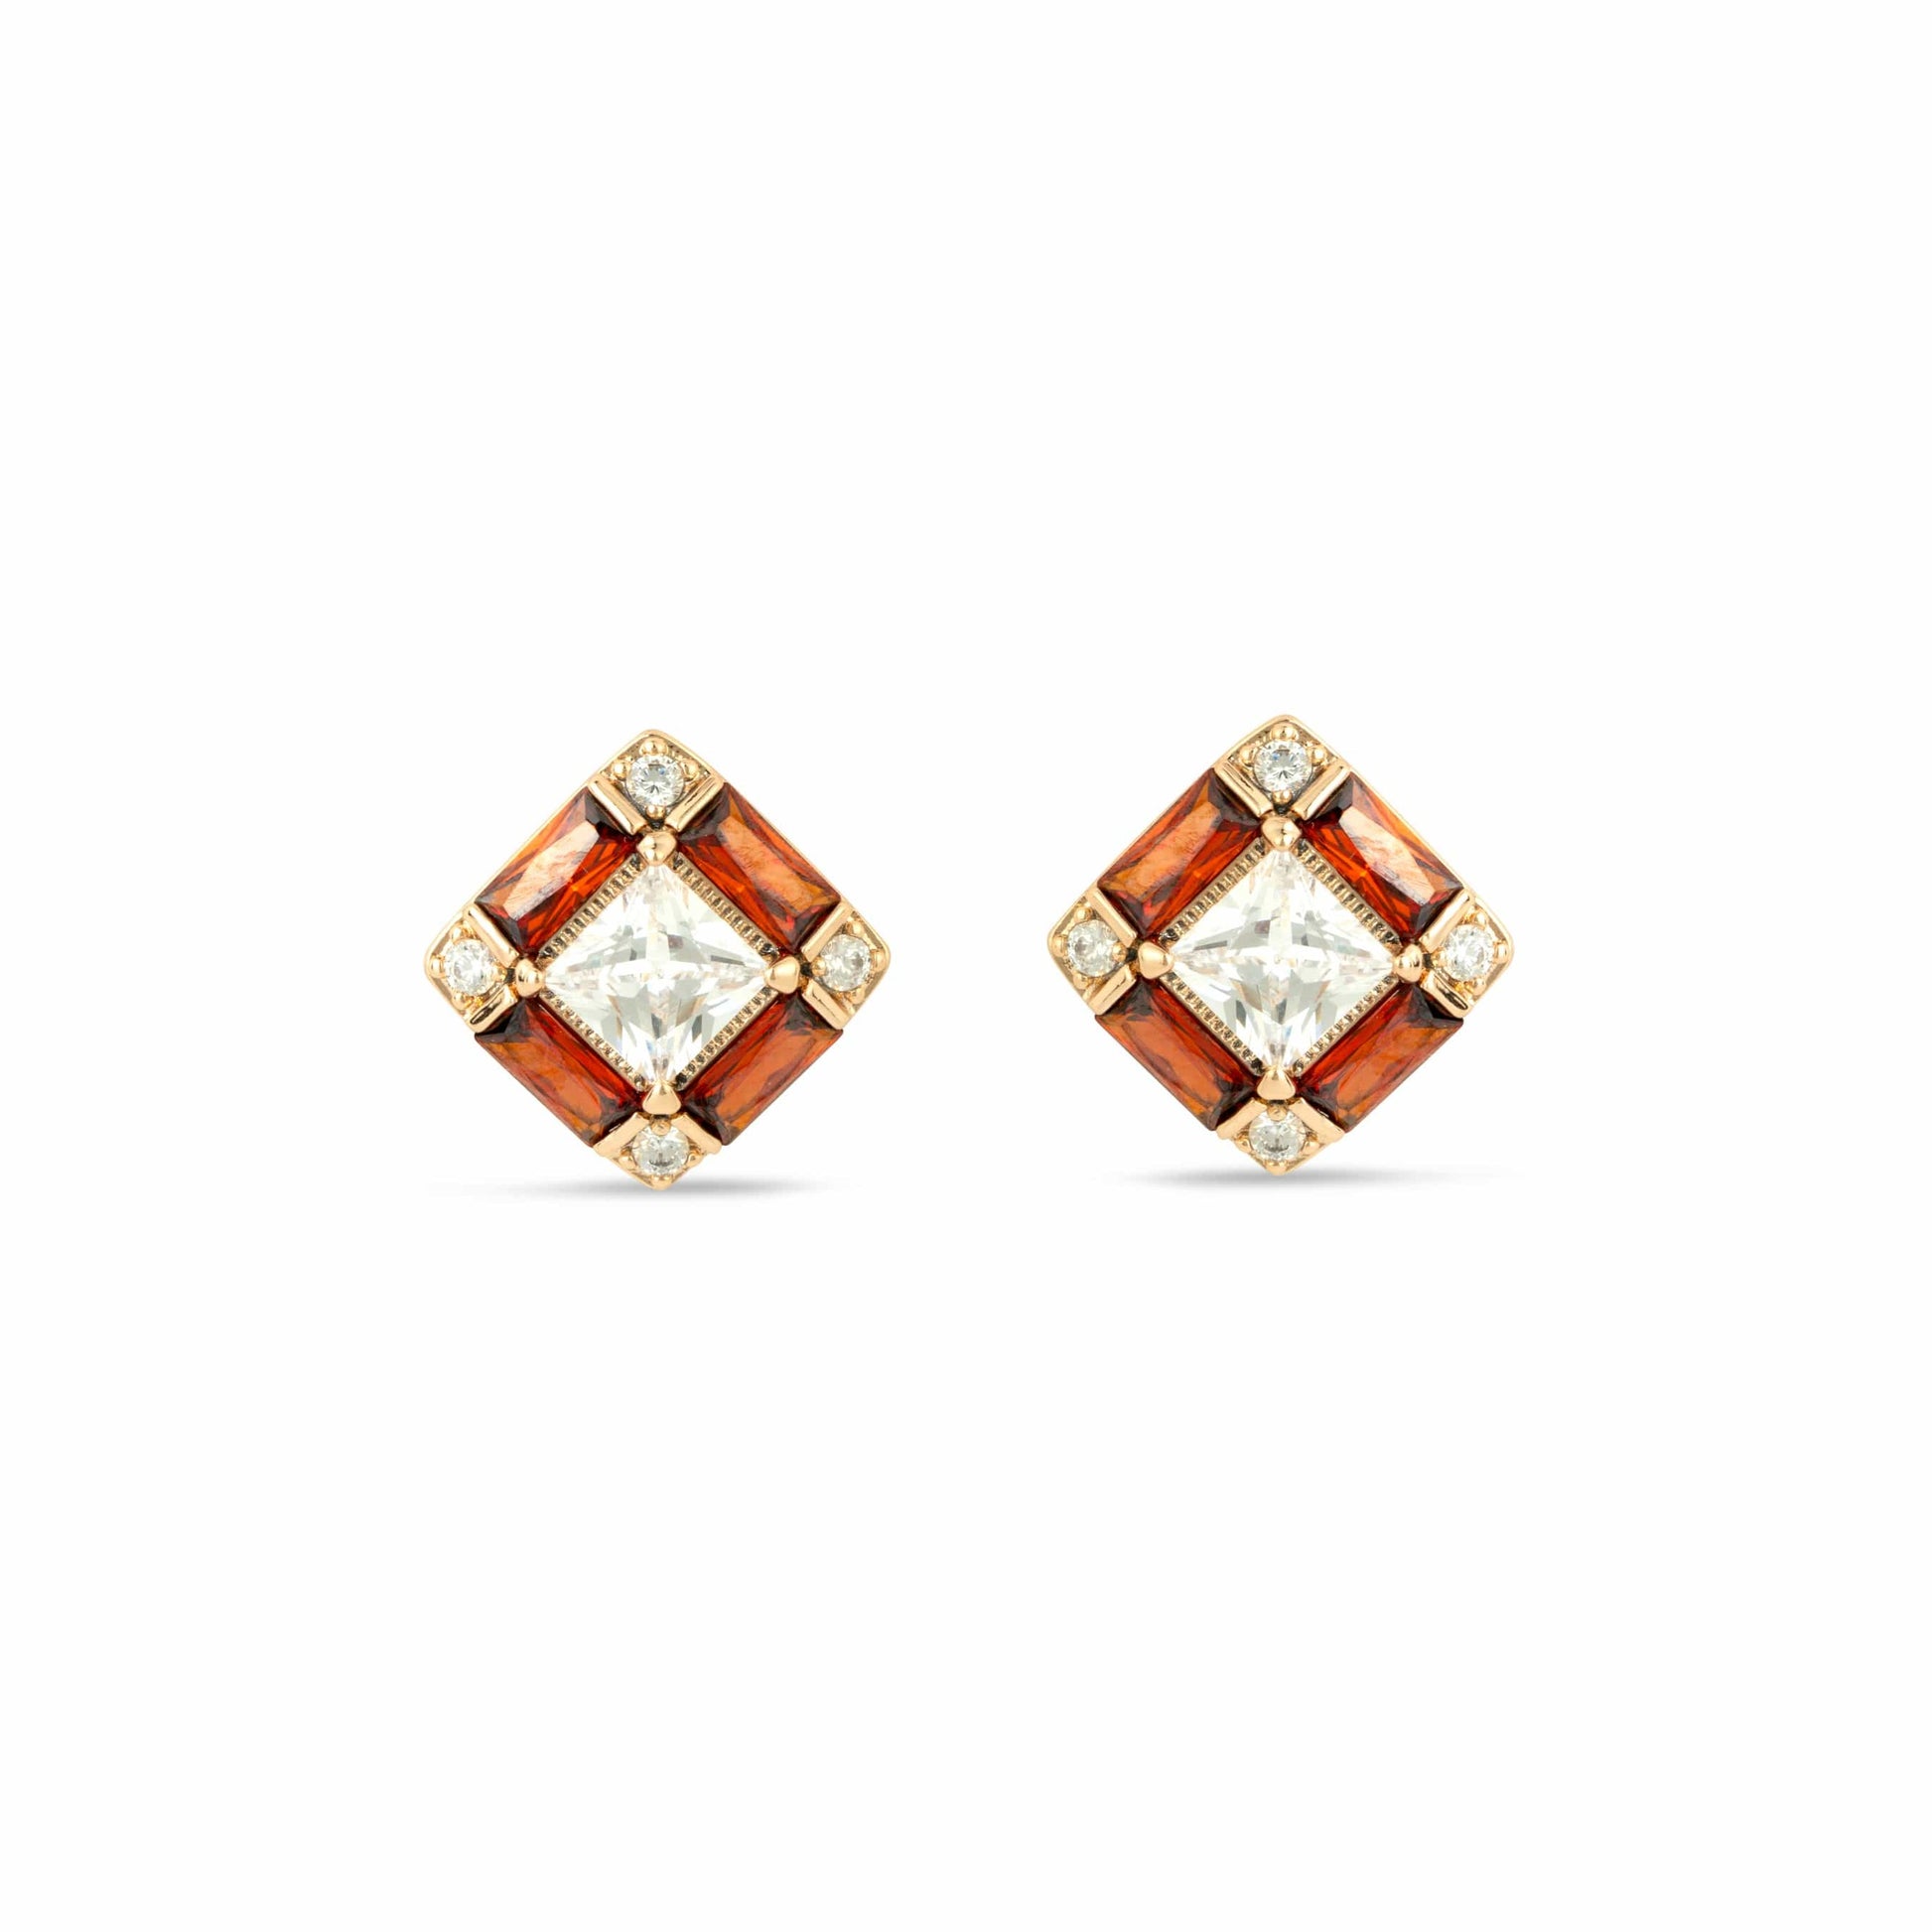 Gold Stud Earrings with Red and Clear Cubic Zirconia Crystals - Love & Lilly Jewellery